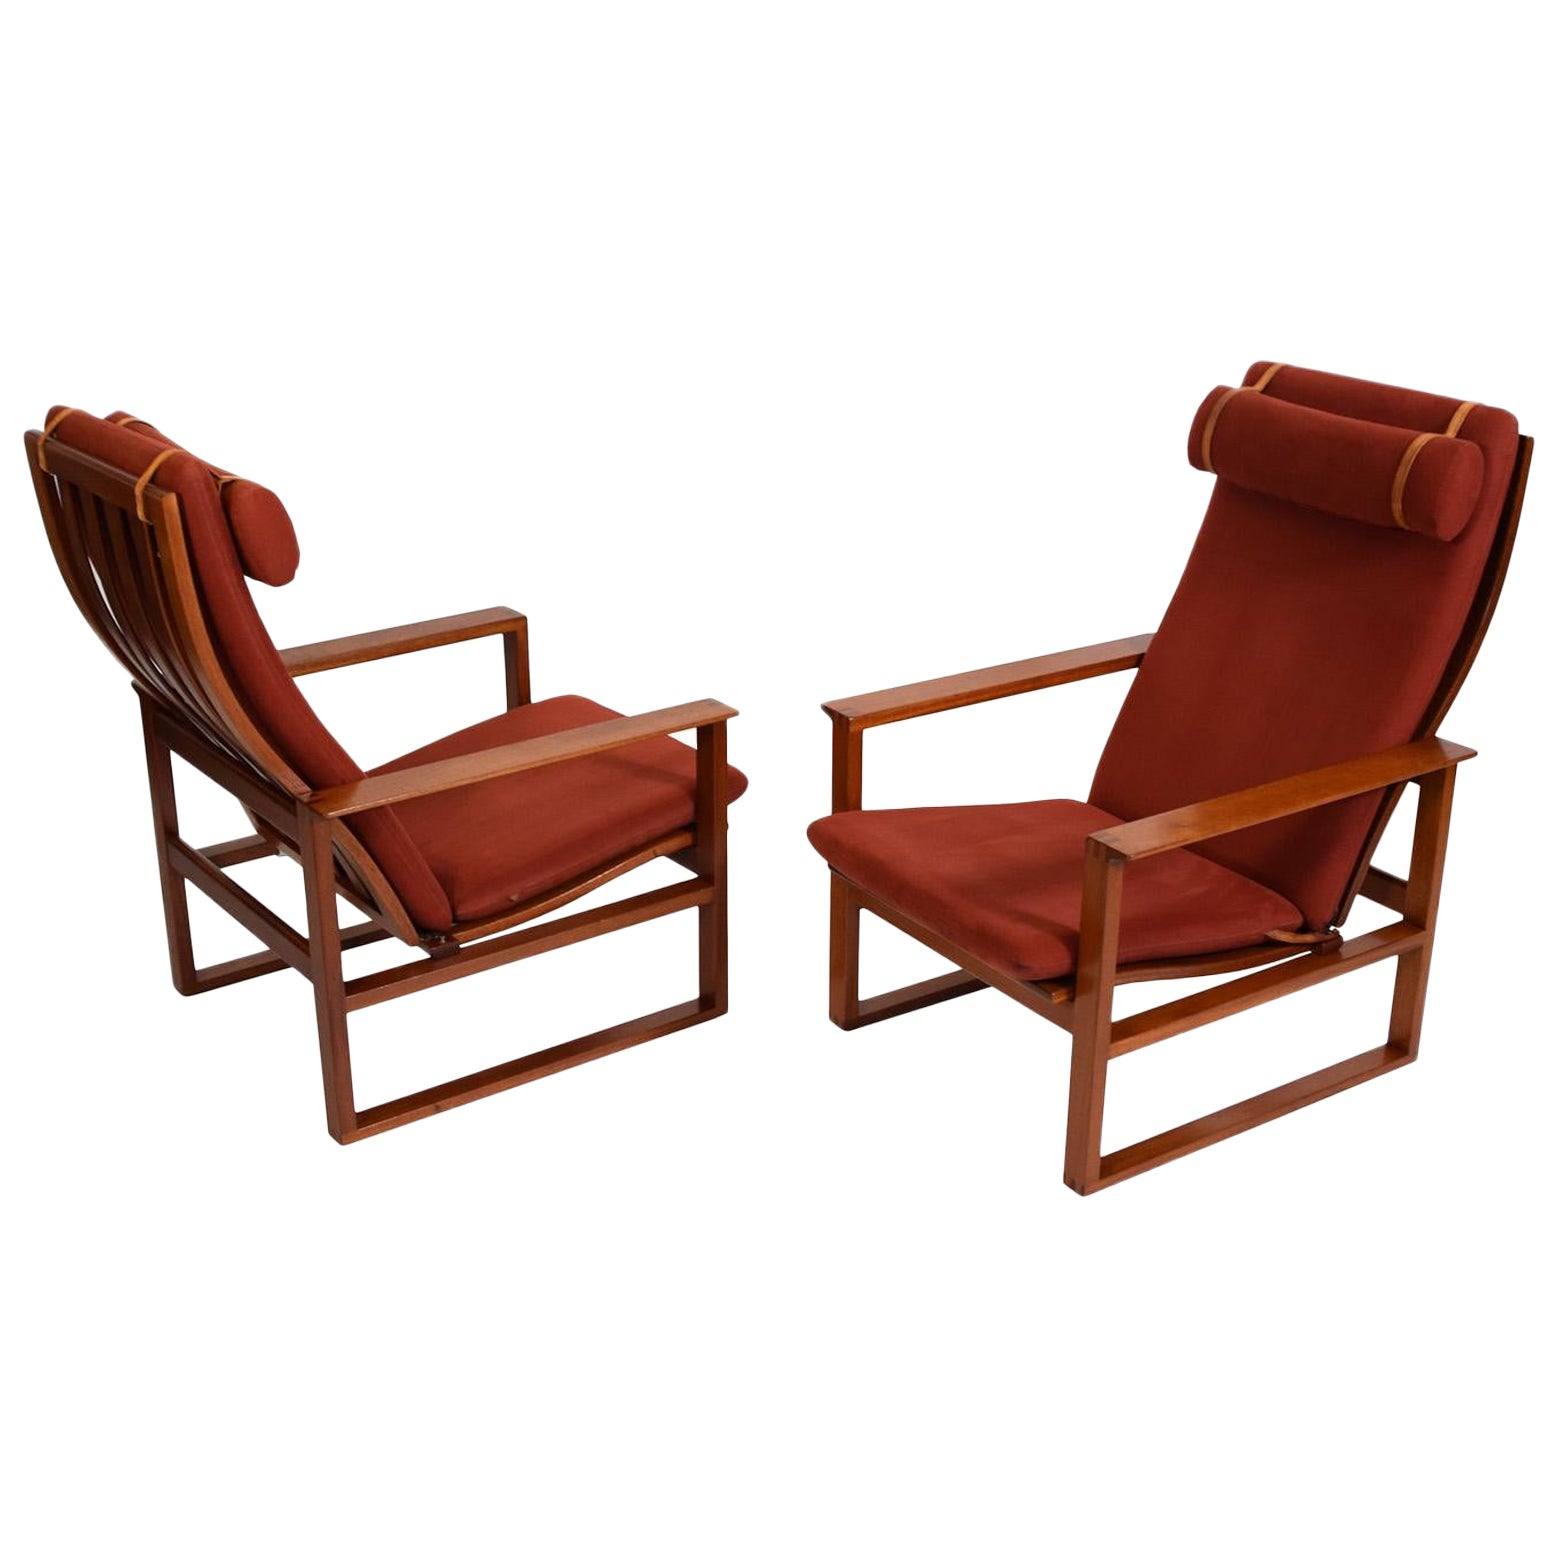 Børge Mogensen, Model 2254 Lounge Chairs, 1956 For Sale